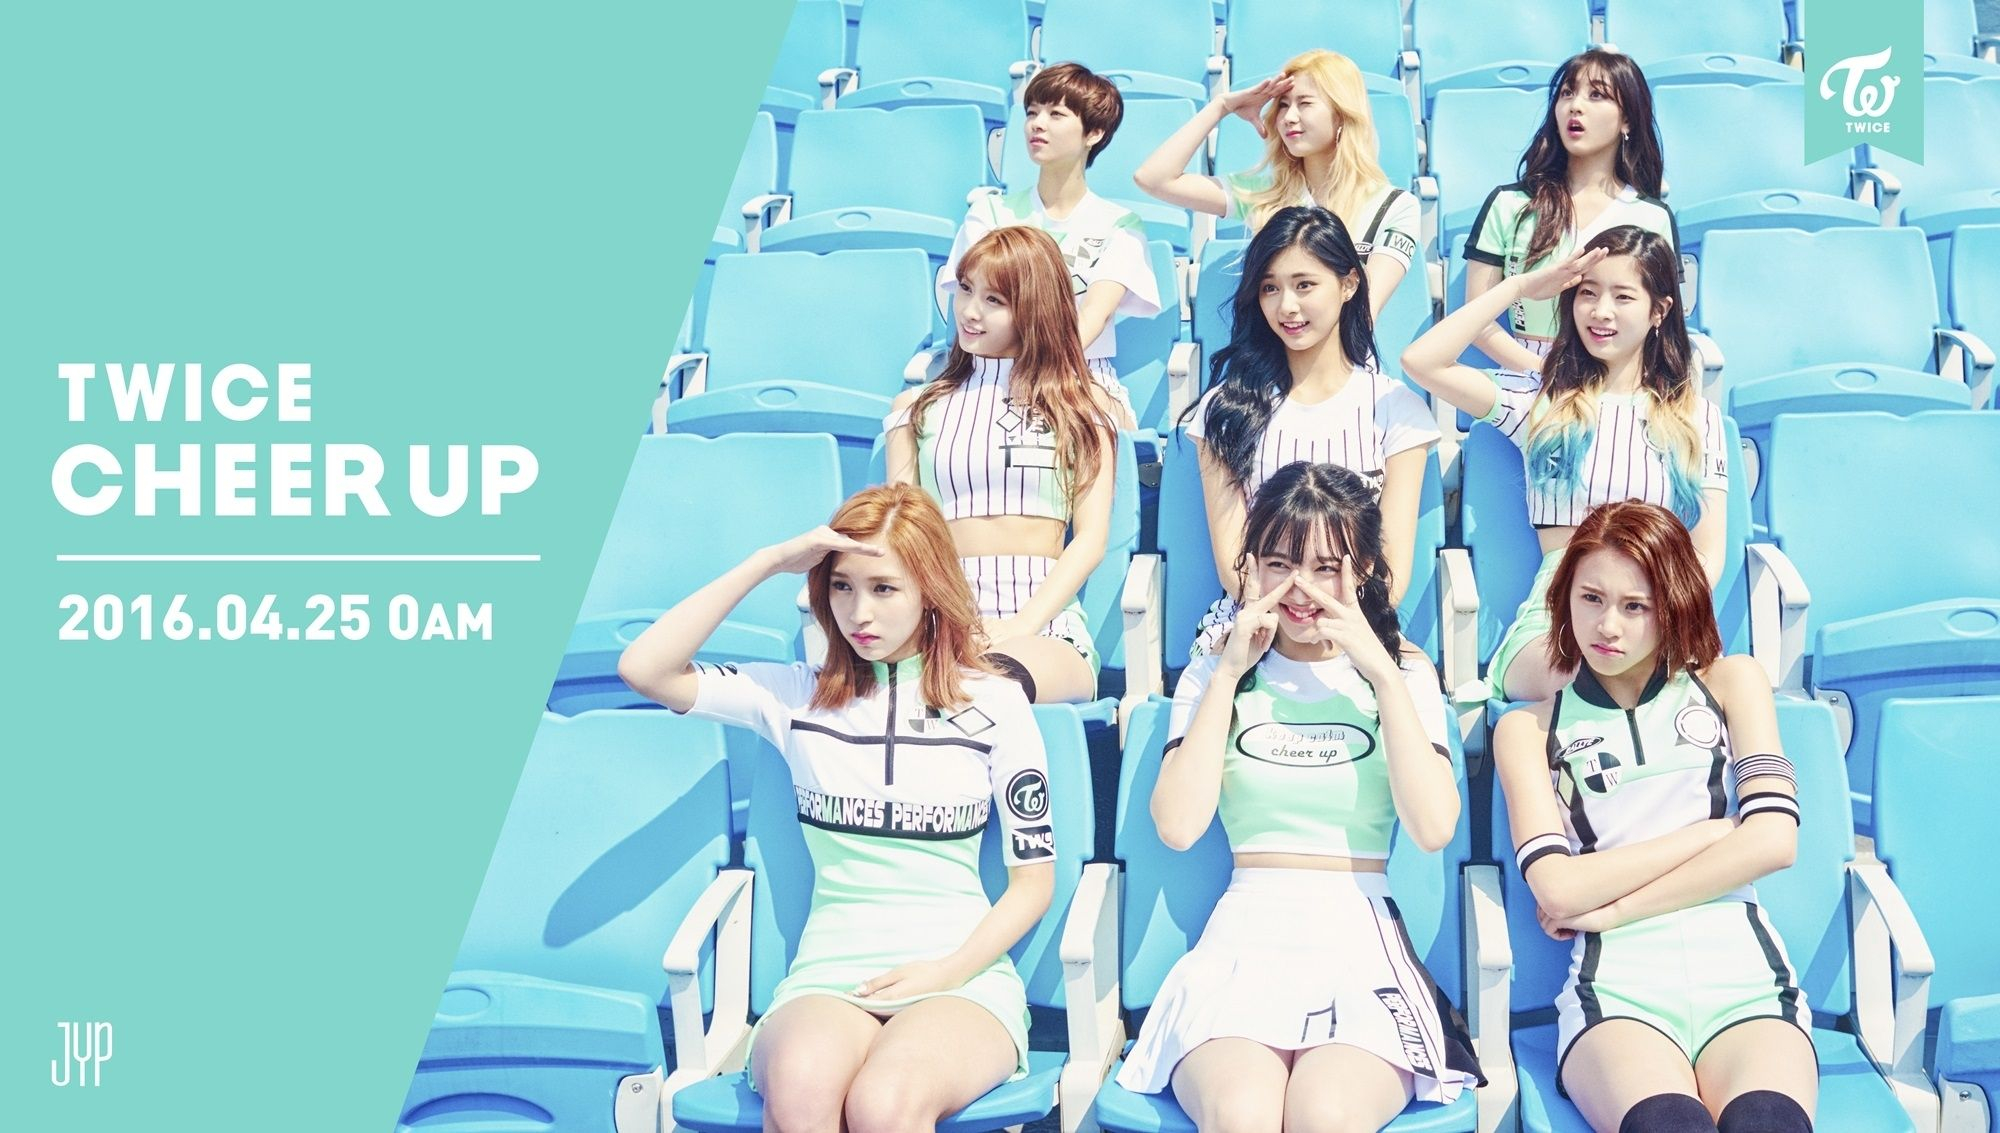 2000x1133 Twice Cheer Up Wallpapers Top Free Twice Cheer Up Backgrounds